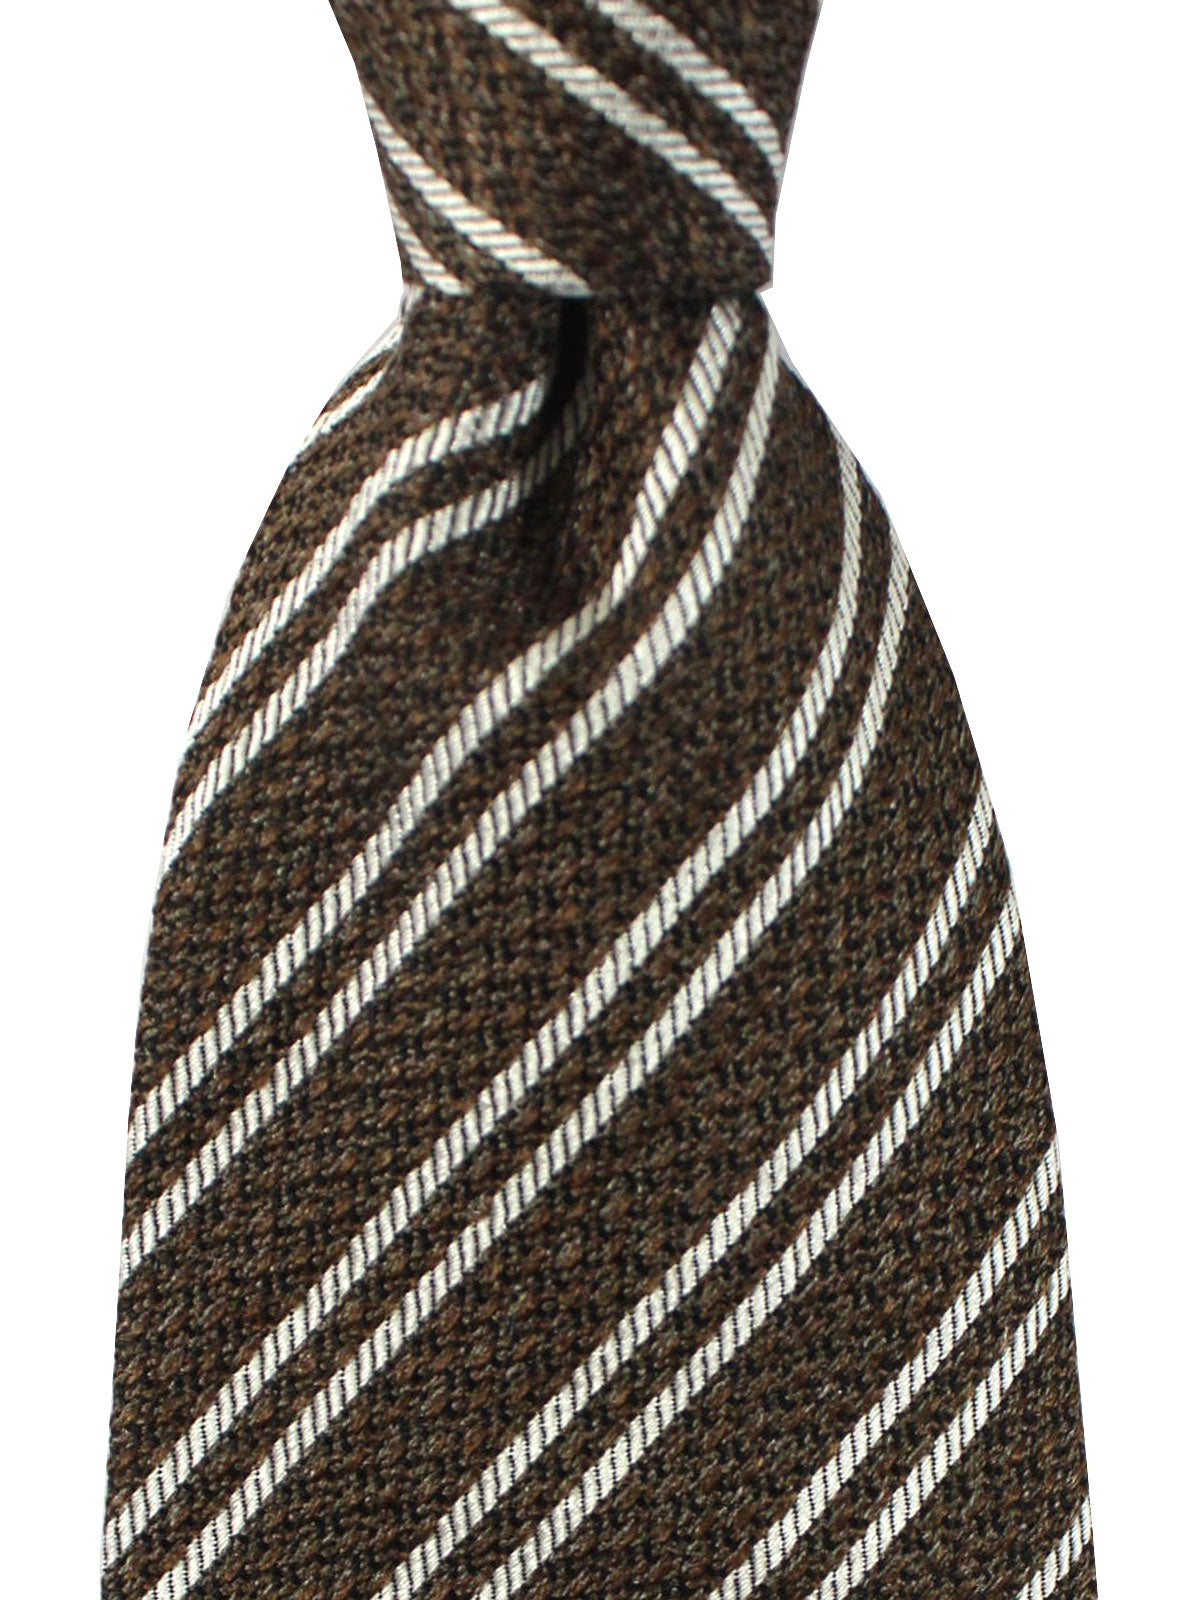 Tom Ford Tie Forest Green Stripes